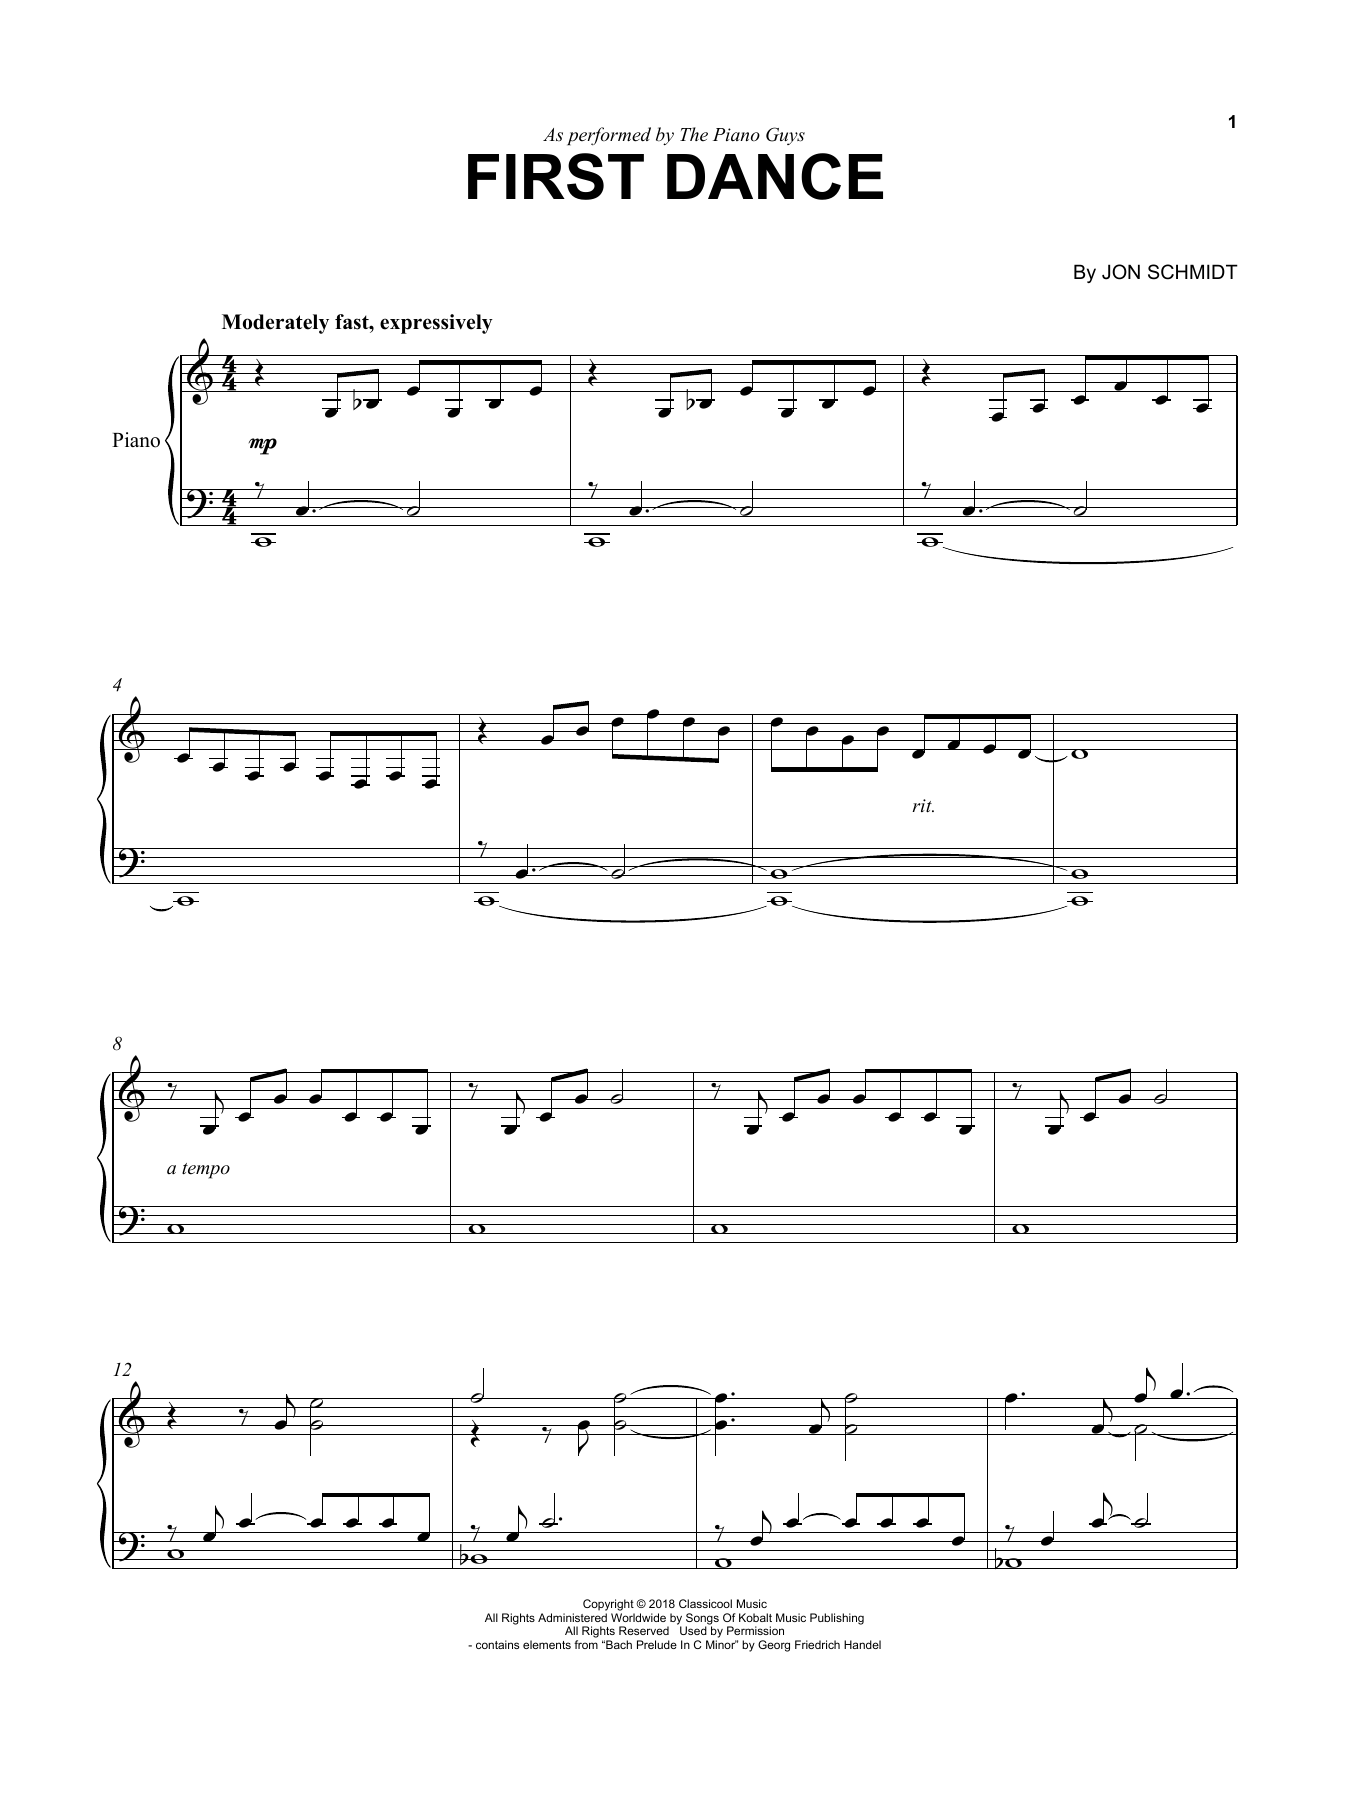 Download The Piano Guys First Dance Sheet Music